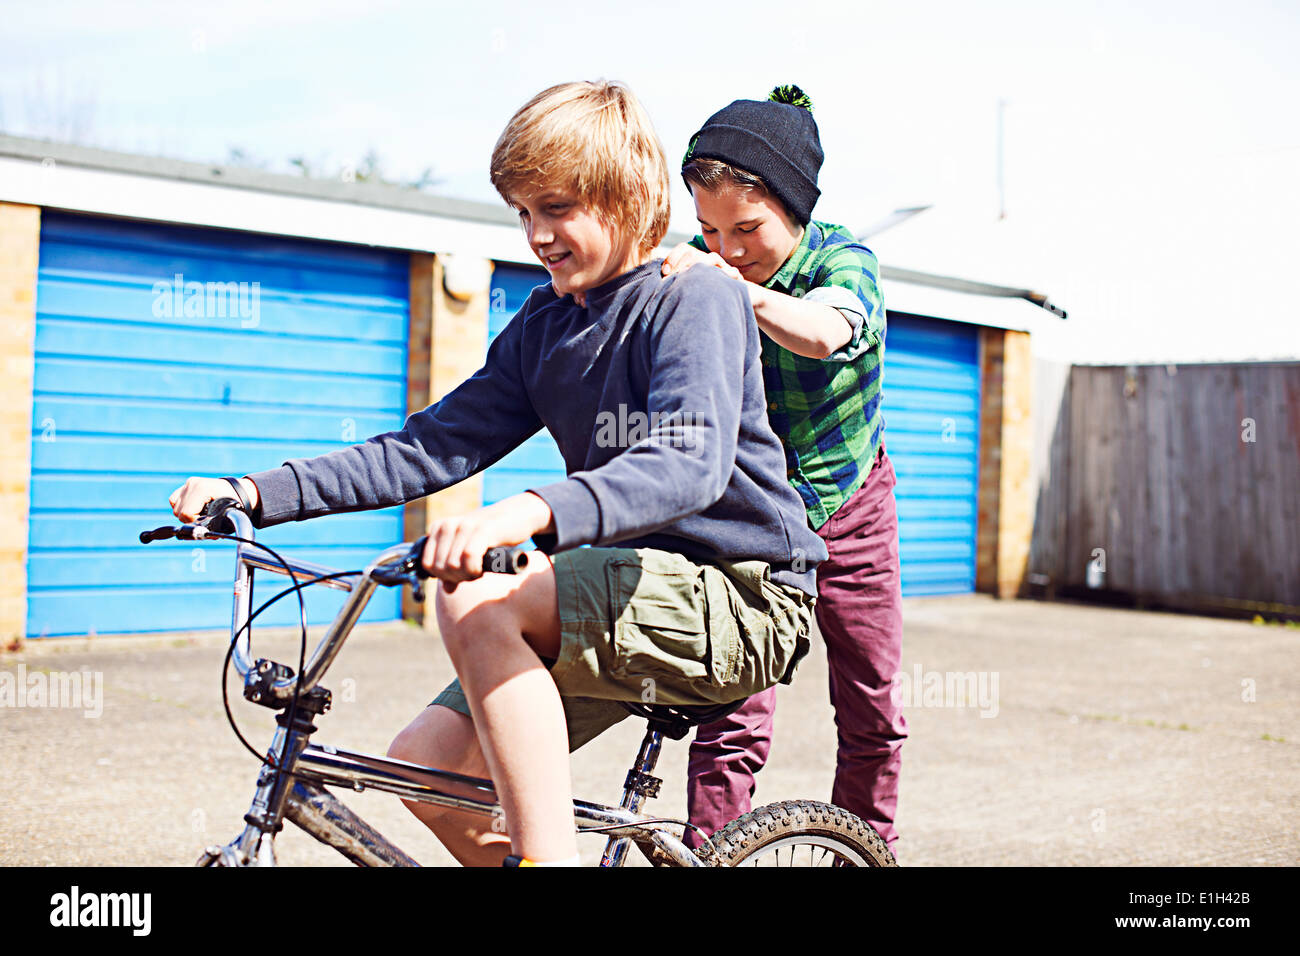 Boy giving friend a ride on back of bike Stock Photo